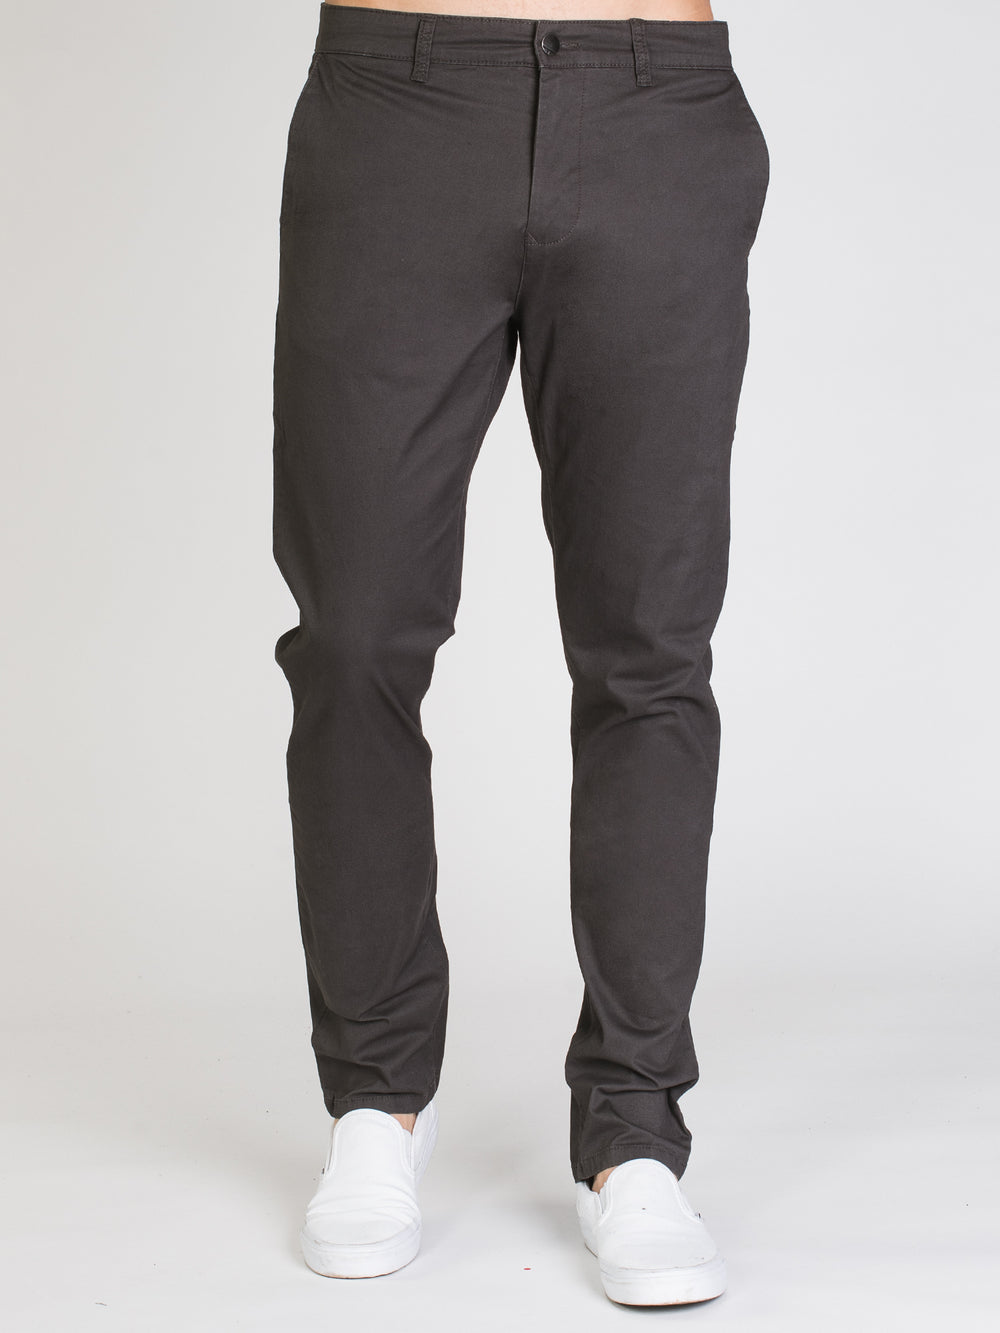 CHINO SLIM TAINTED - CHARCOAL - DÉSTOCKAGE